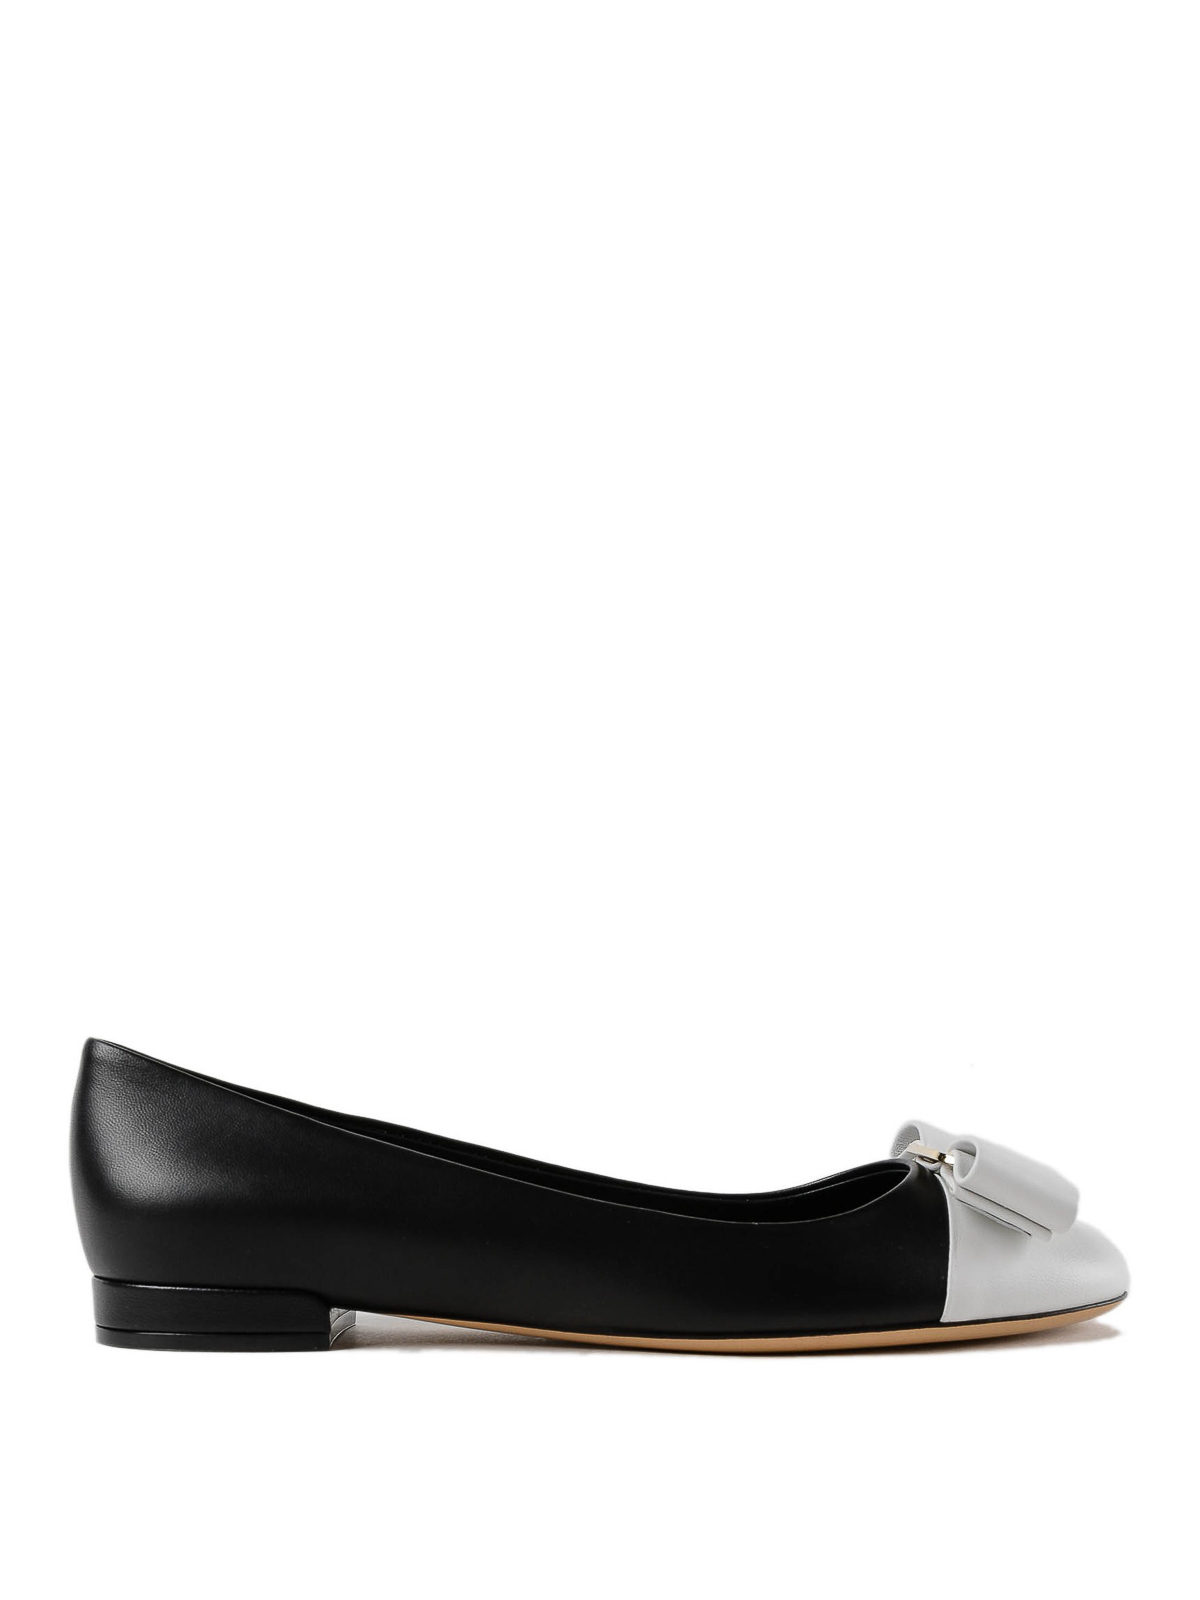 black and white flats